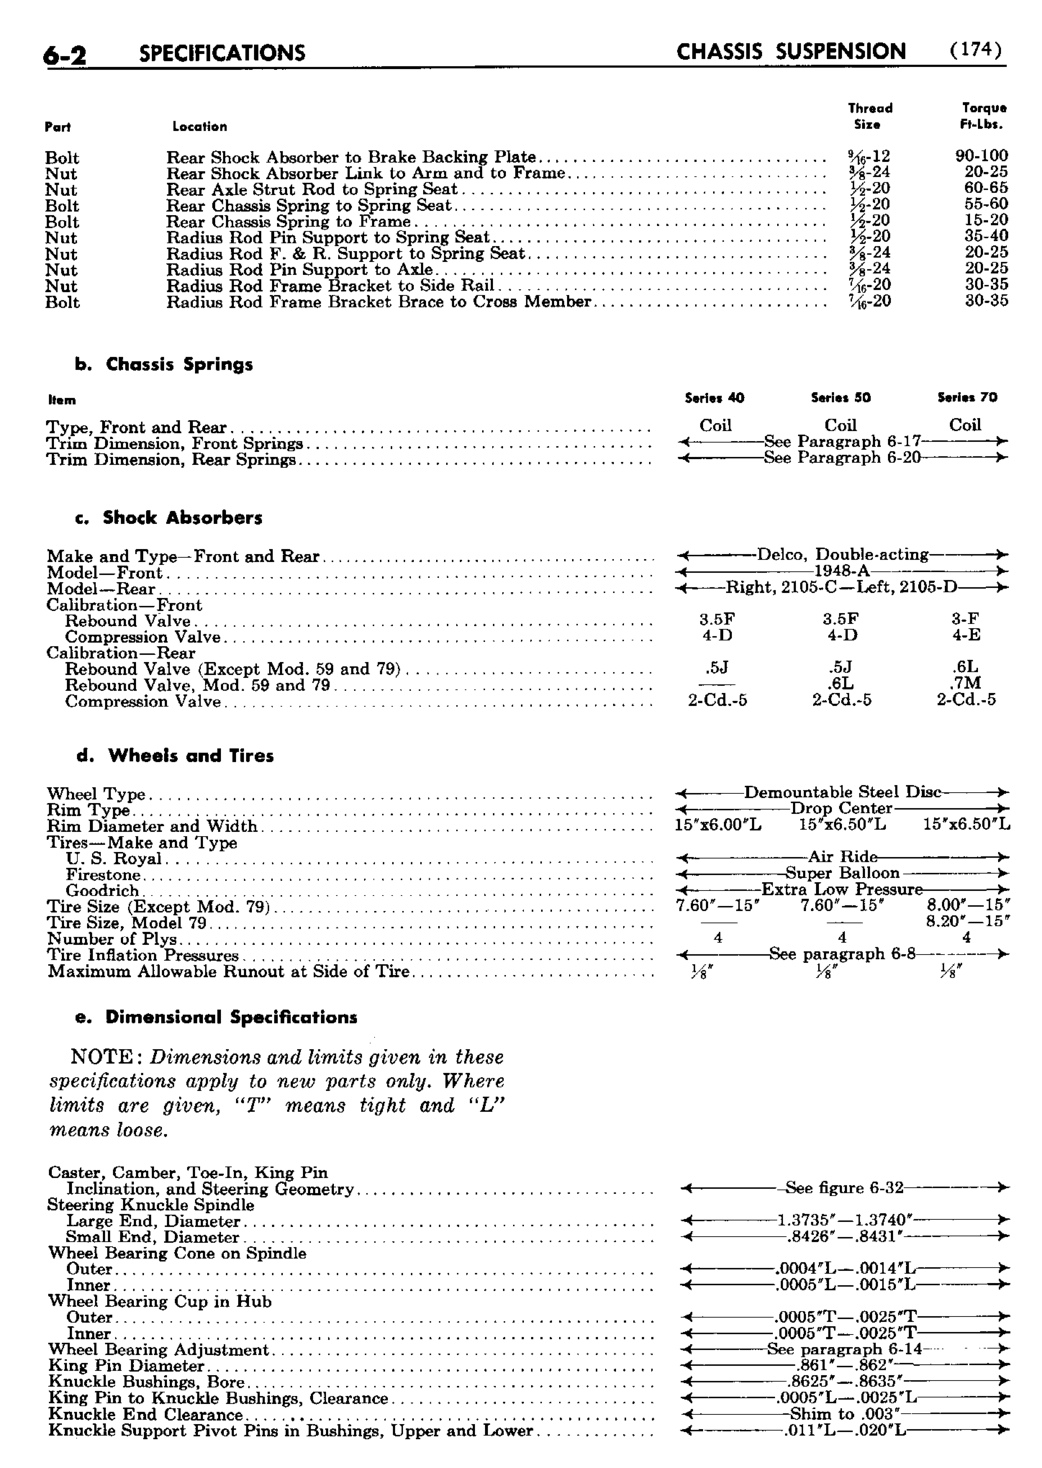 n_07 1950 Buick Shop Manual - Chassis Suspension-002-002.jpg